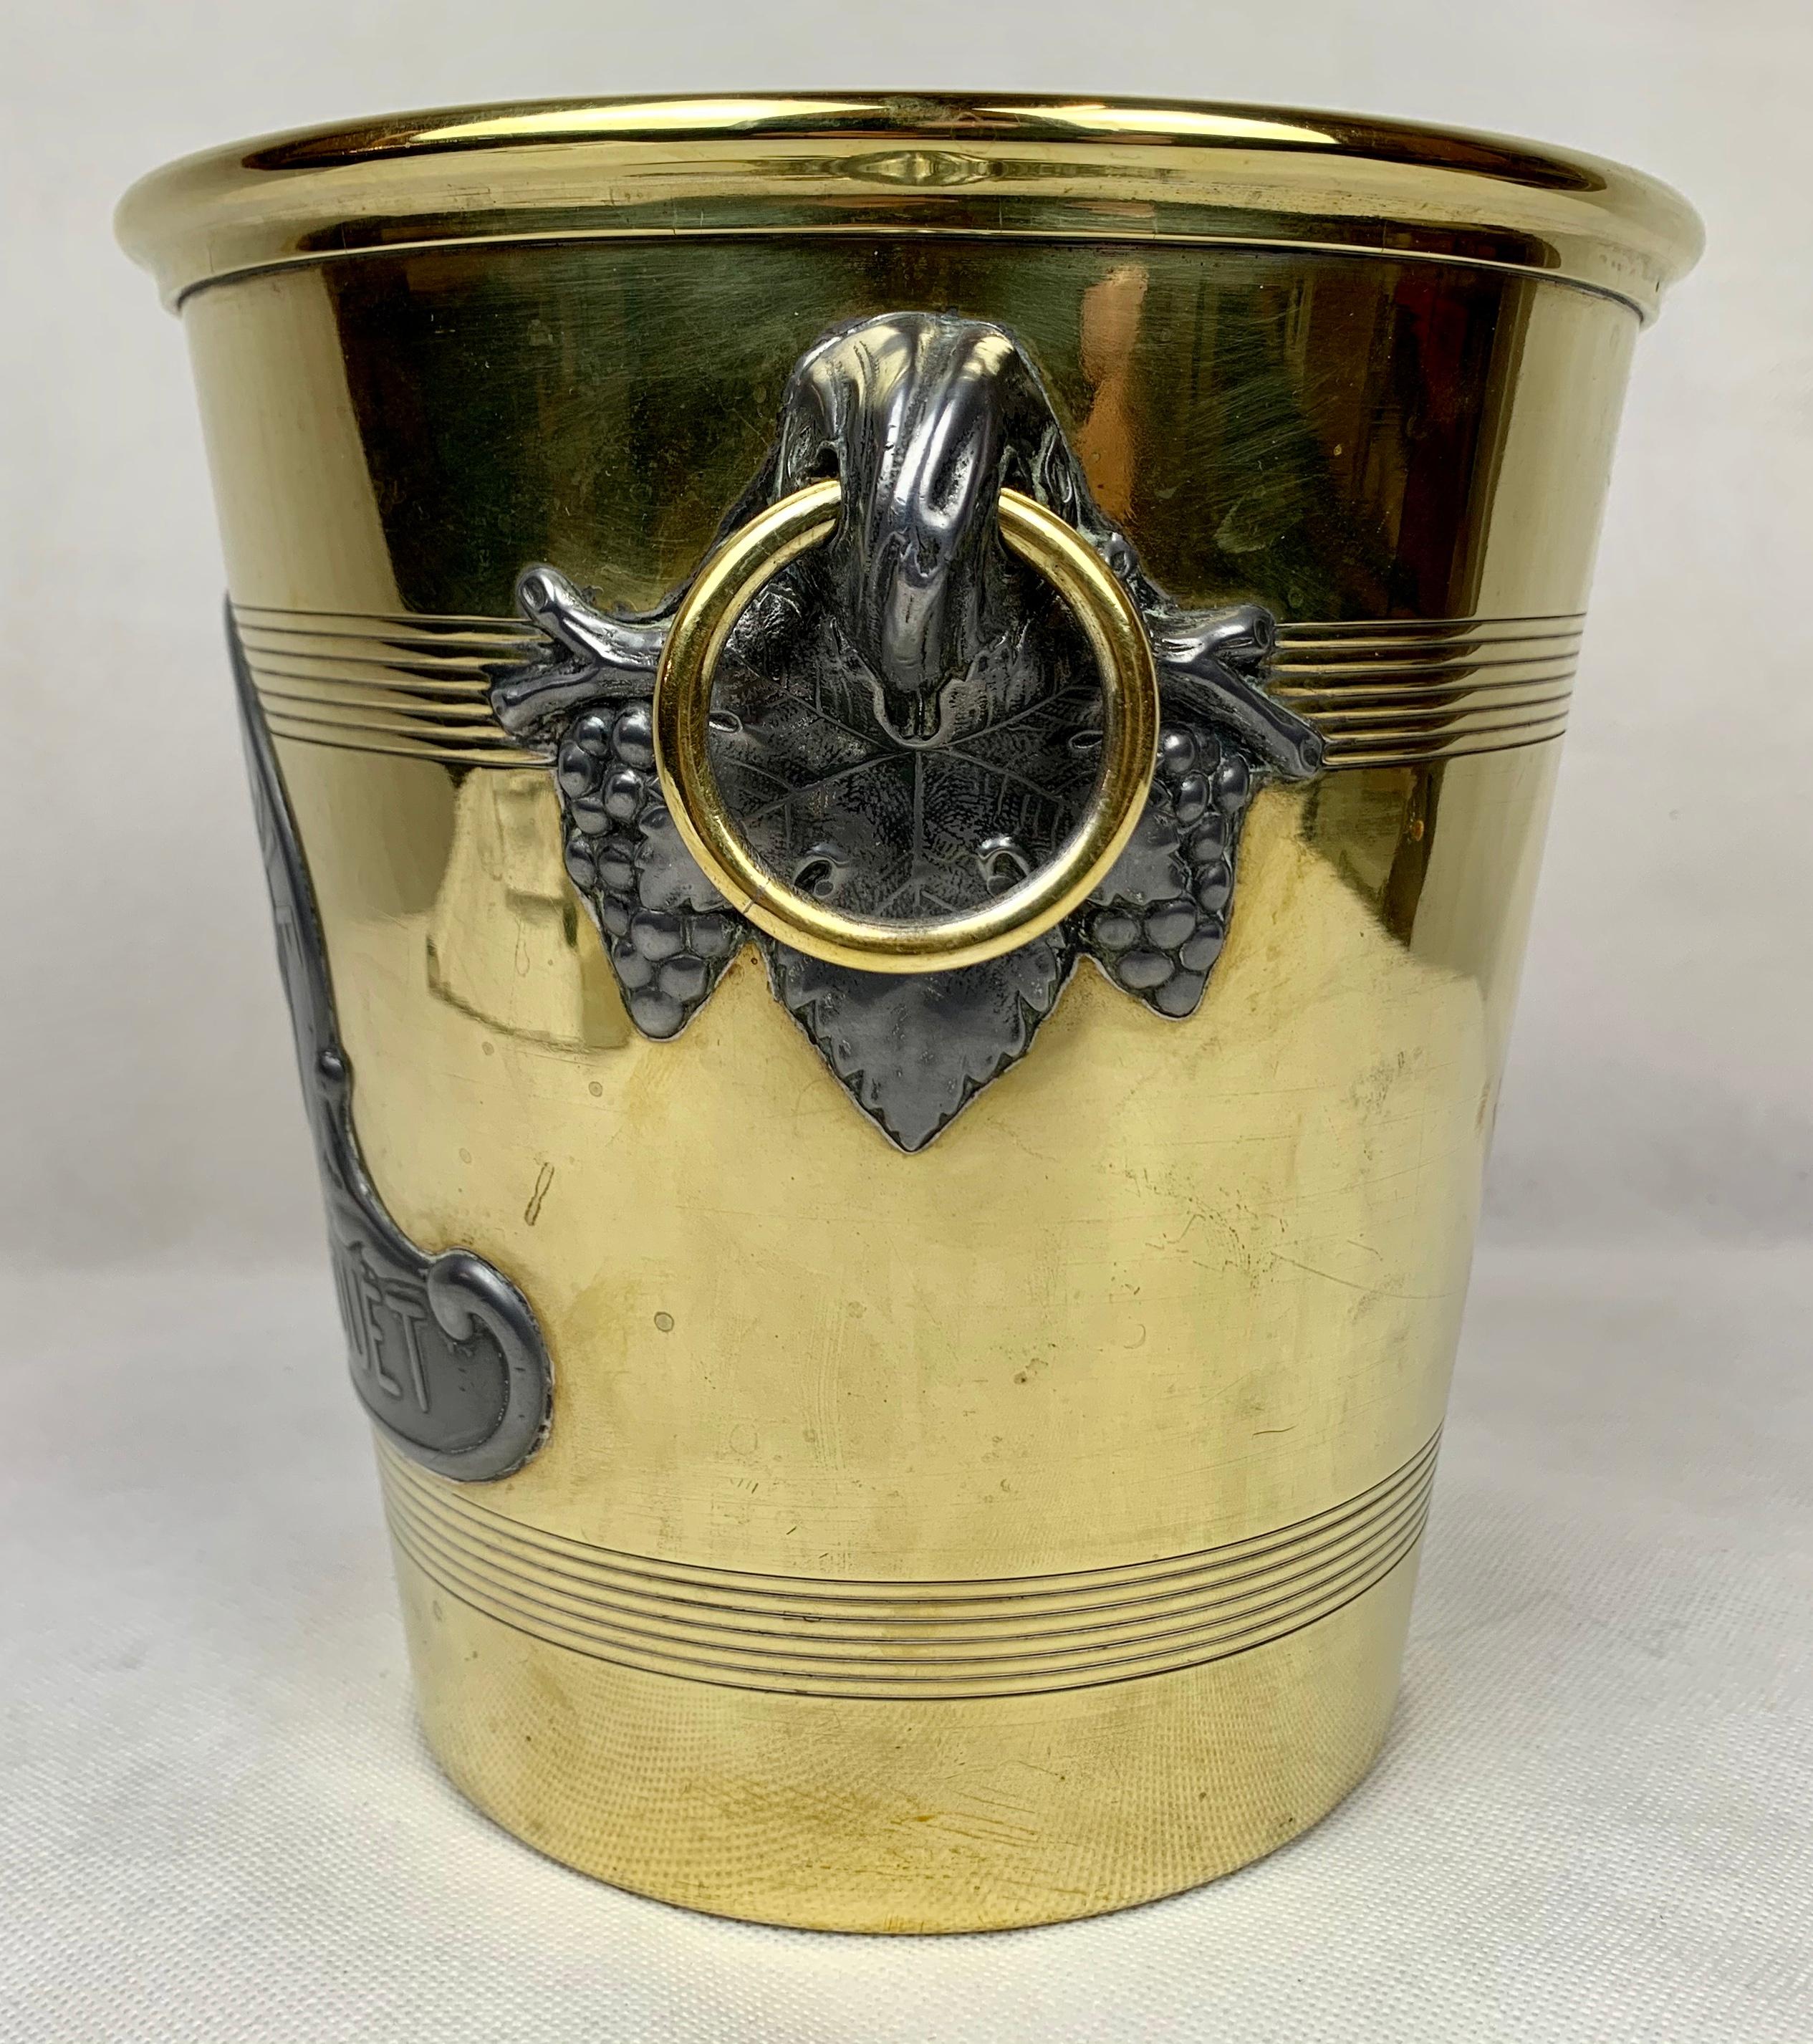 Cast  Antique Perrier-Jouet Champagne Cooler in Brass and Pewter Made by Argit, Paris